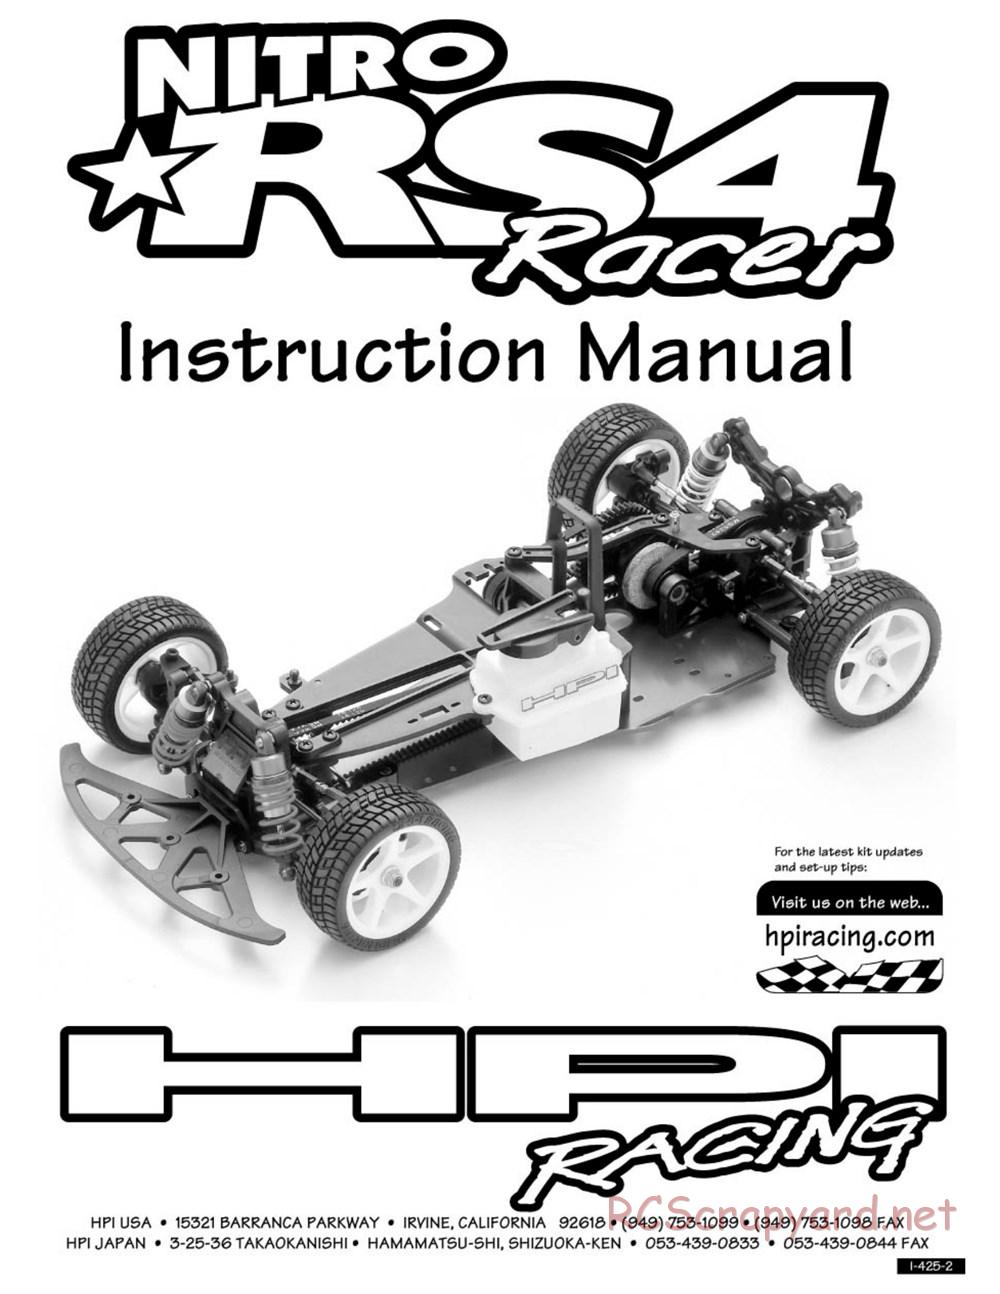 HPI - Nitro RS4 Racer Chassis - Manual - Page 1